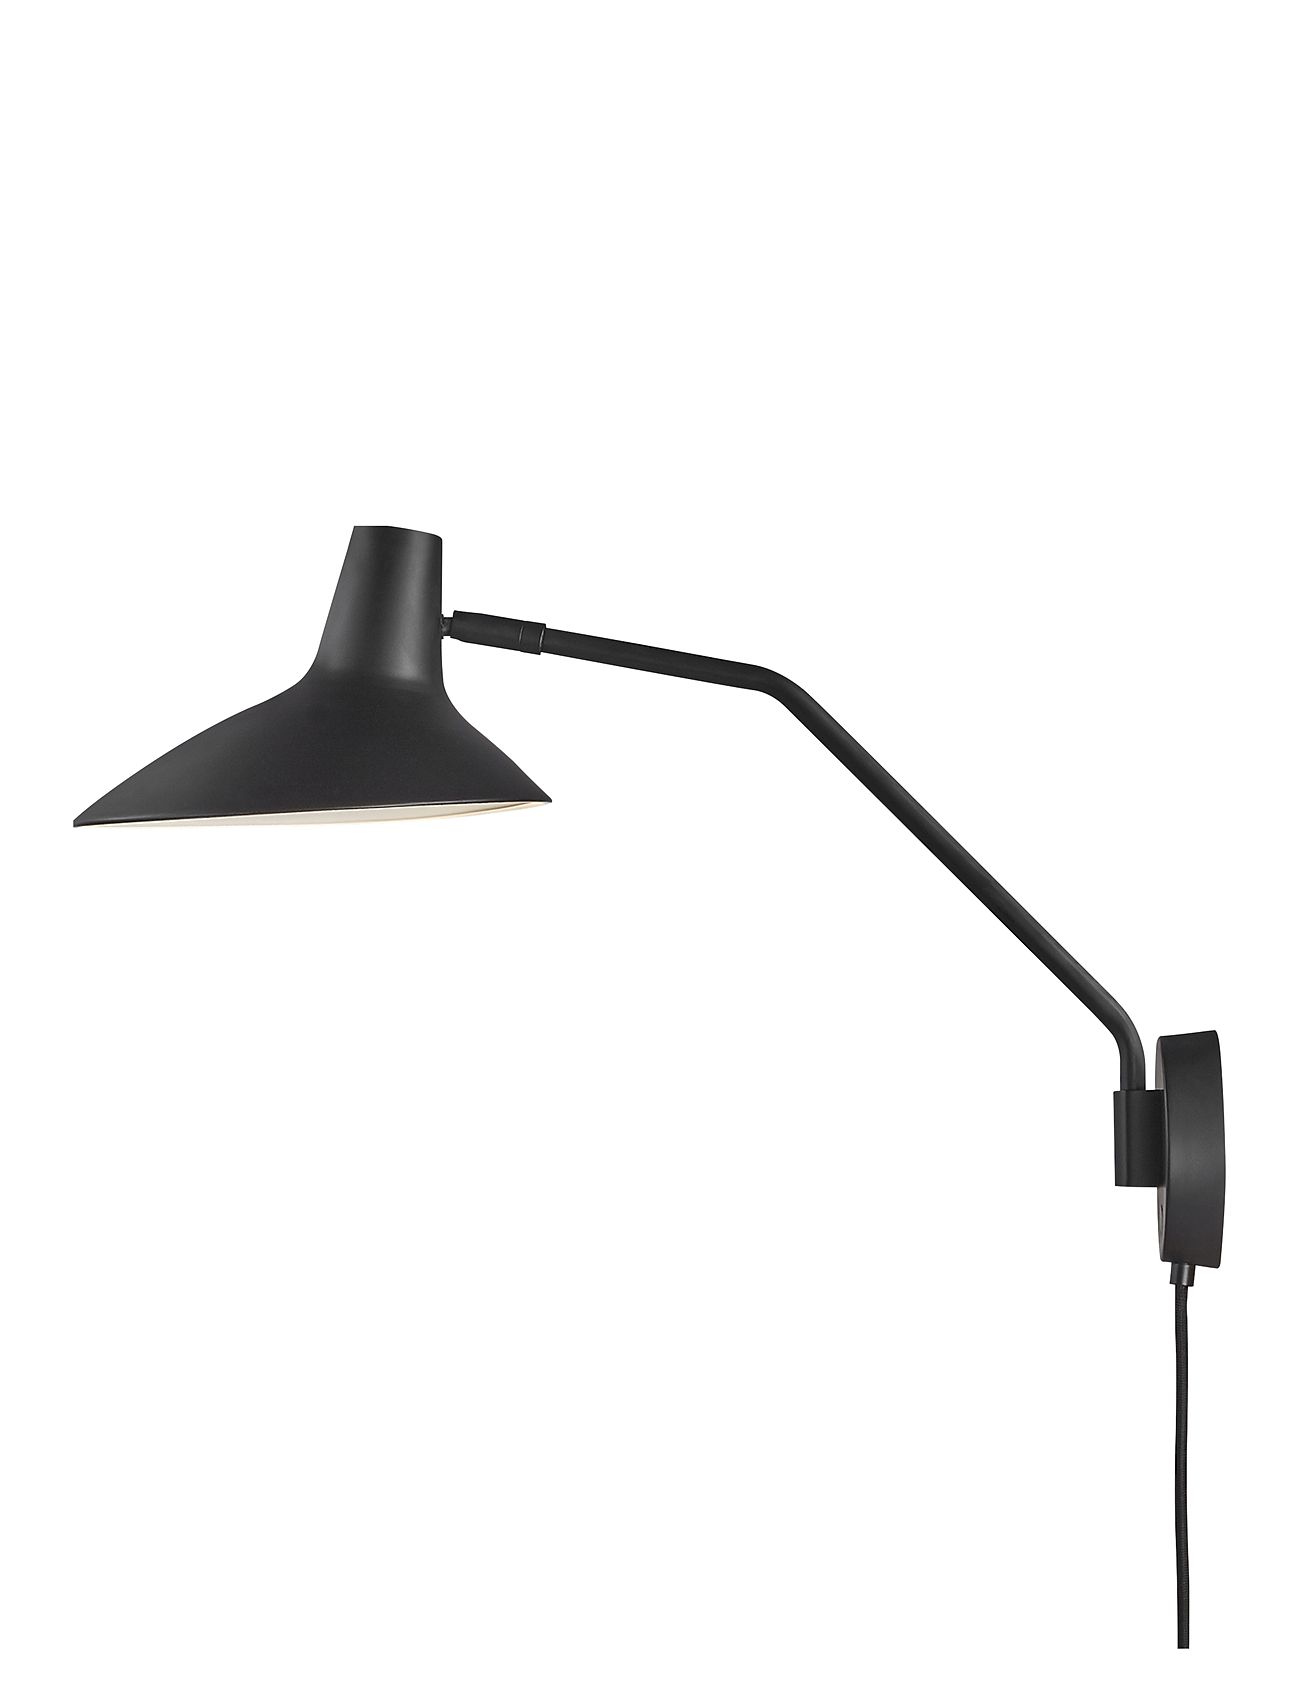 Darci | Væglampe Home Lighting Lamps Wall Lamps Black Design For The People